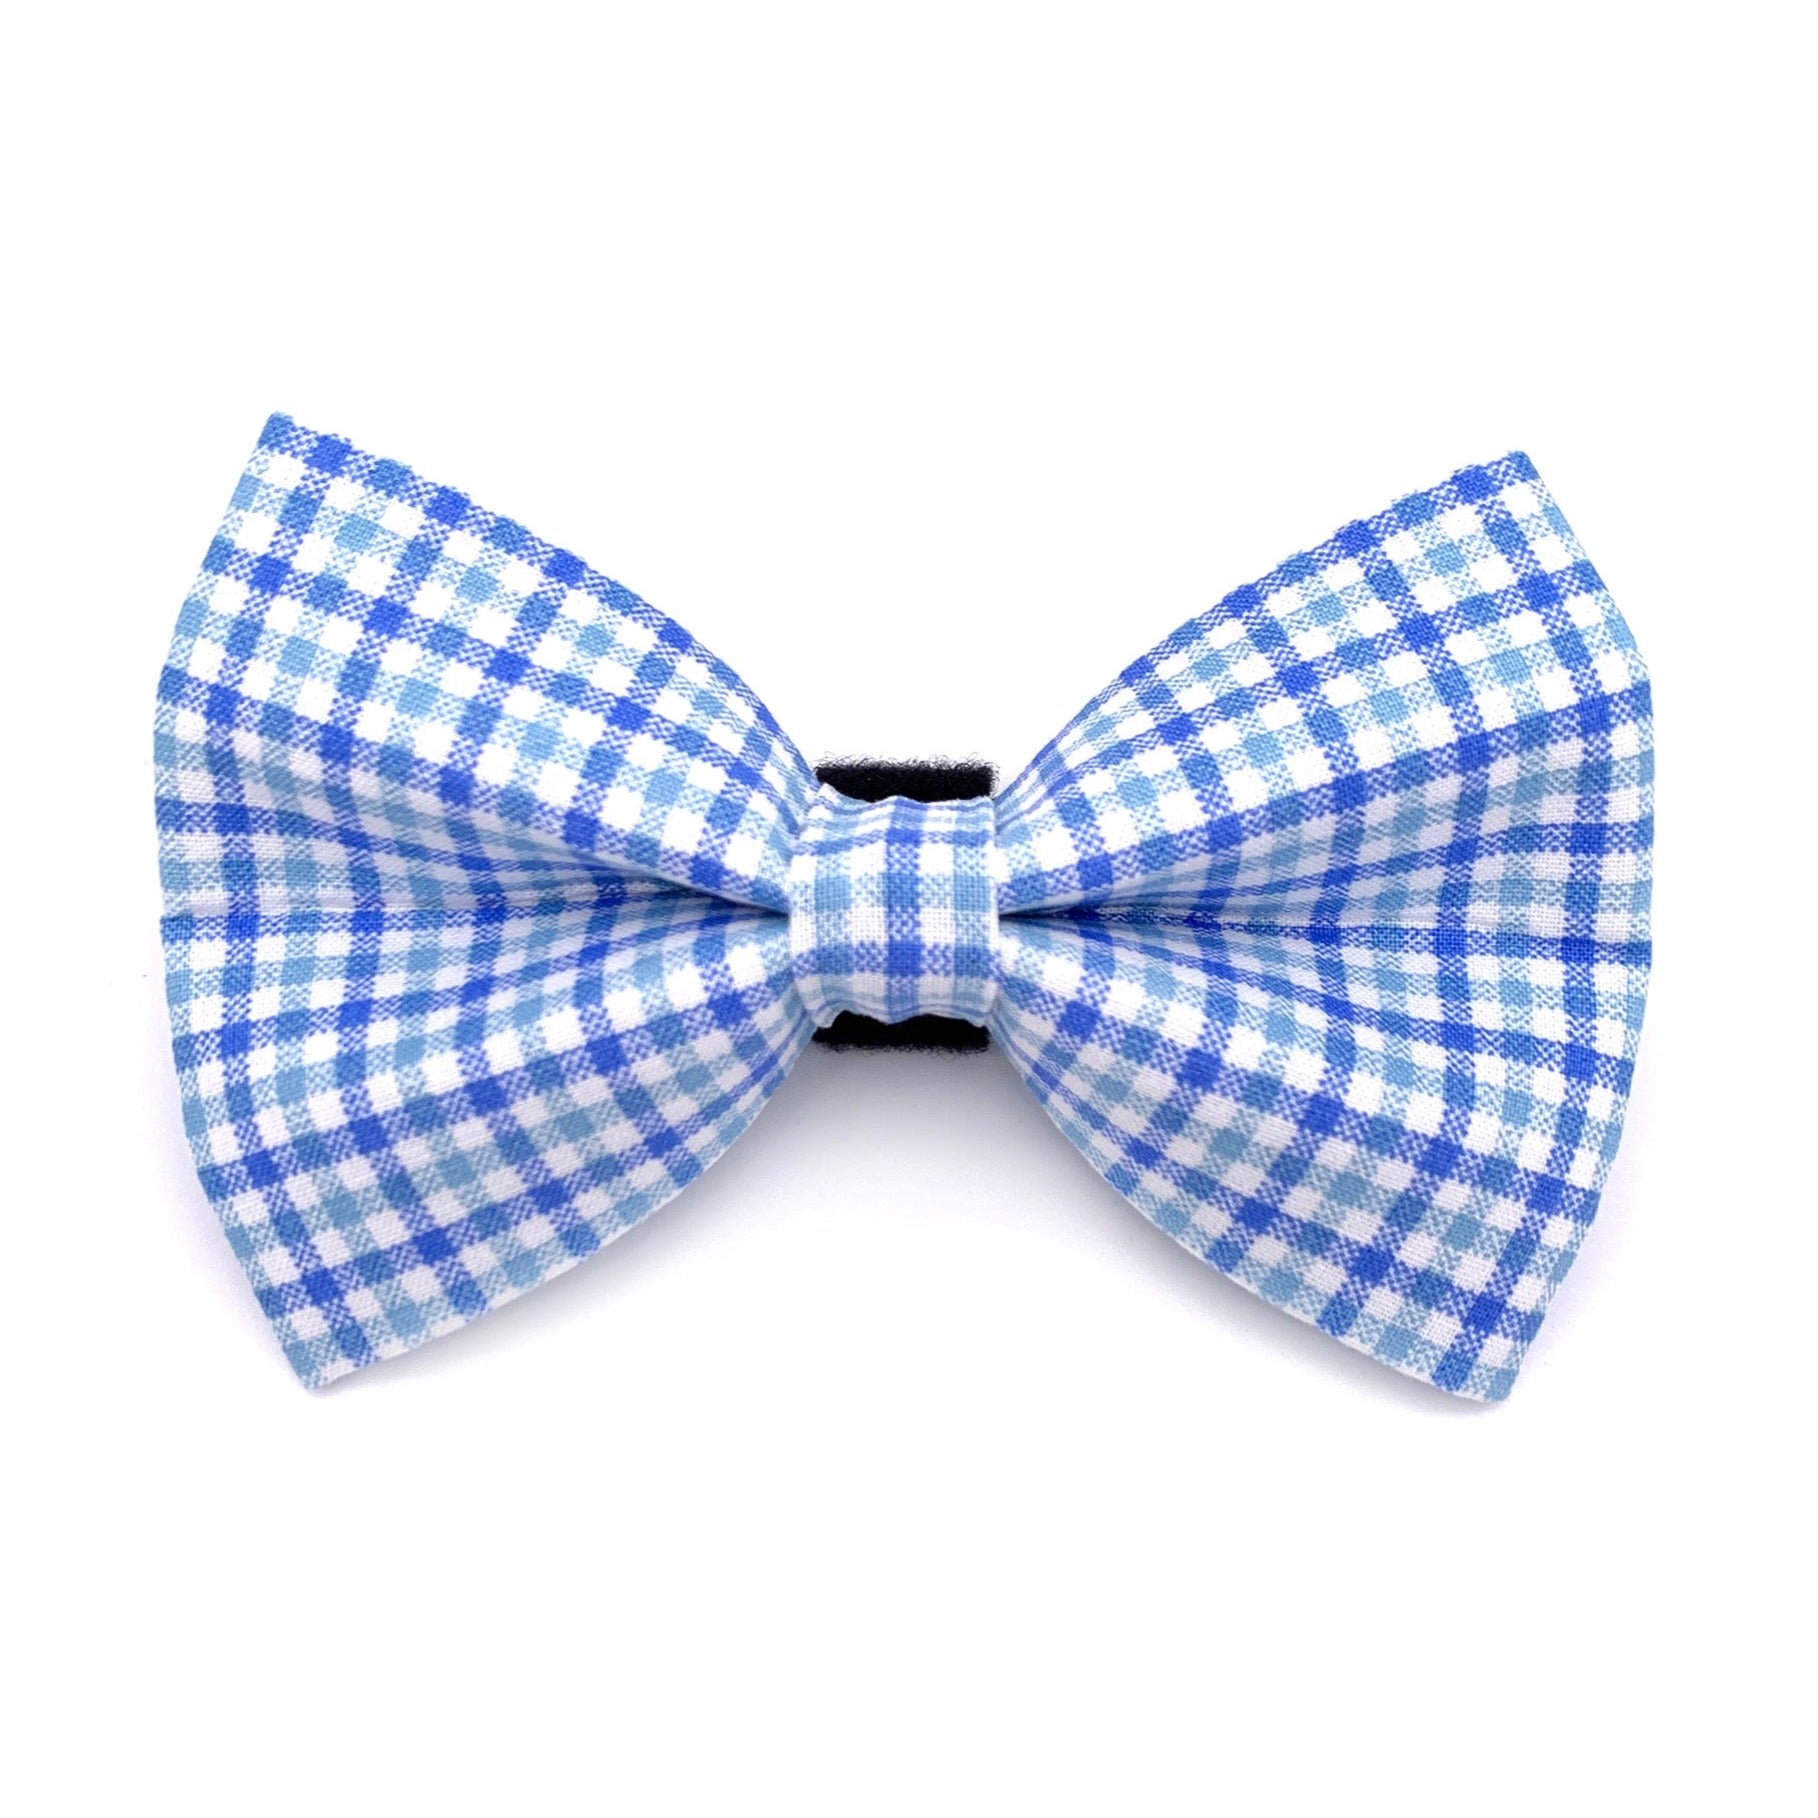 Blue Gingham Dog Bow Tie